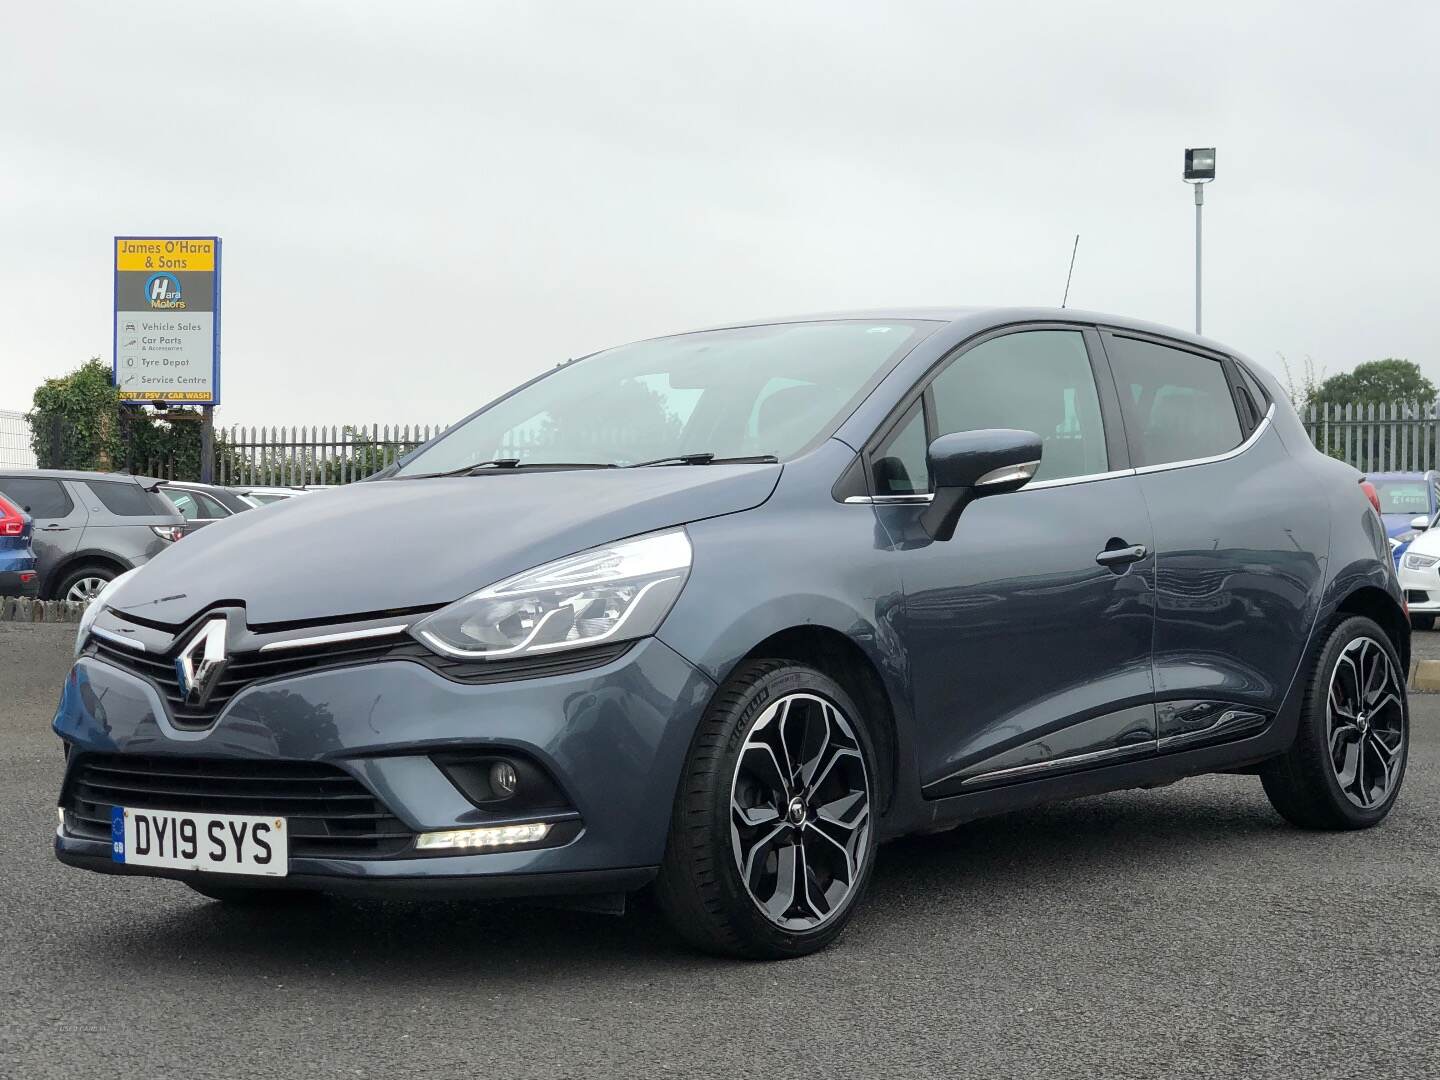 2019 Renault Clio: early 2019 launch confirmed by Renault